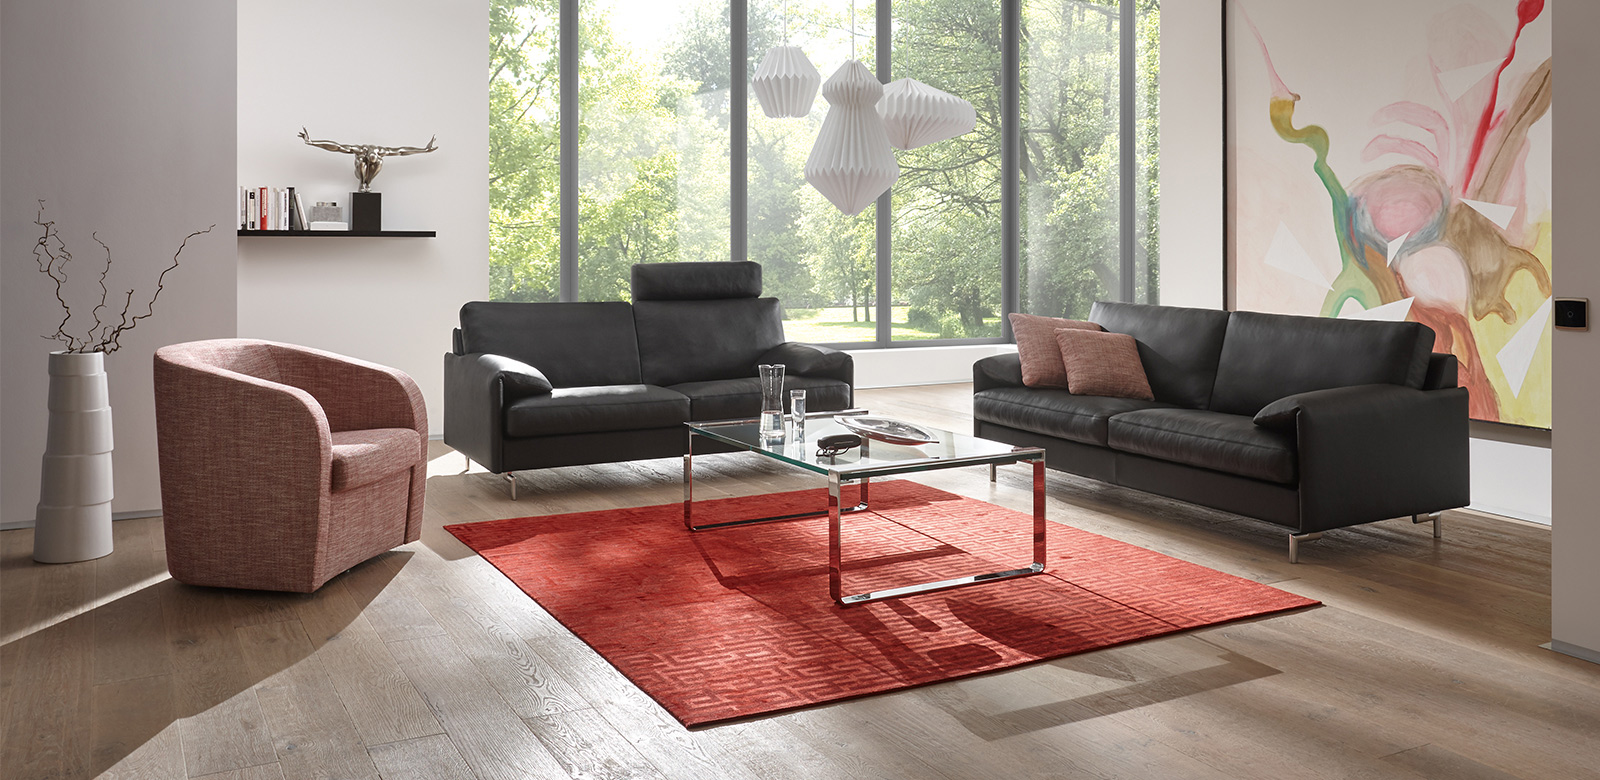 Two CL880 sofas with black leather, armchair in light red fabric and square glass coffee table on red carpet in modern living room with terrace